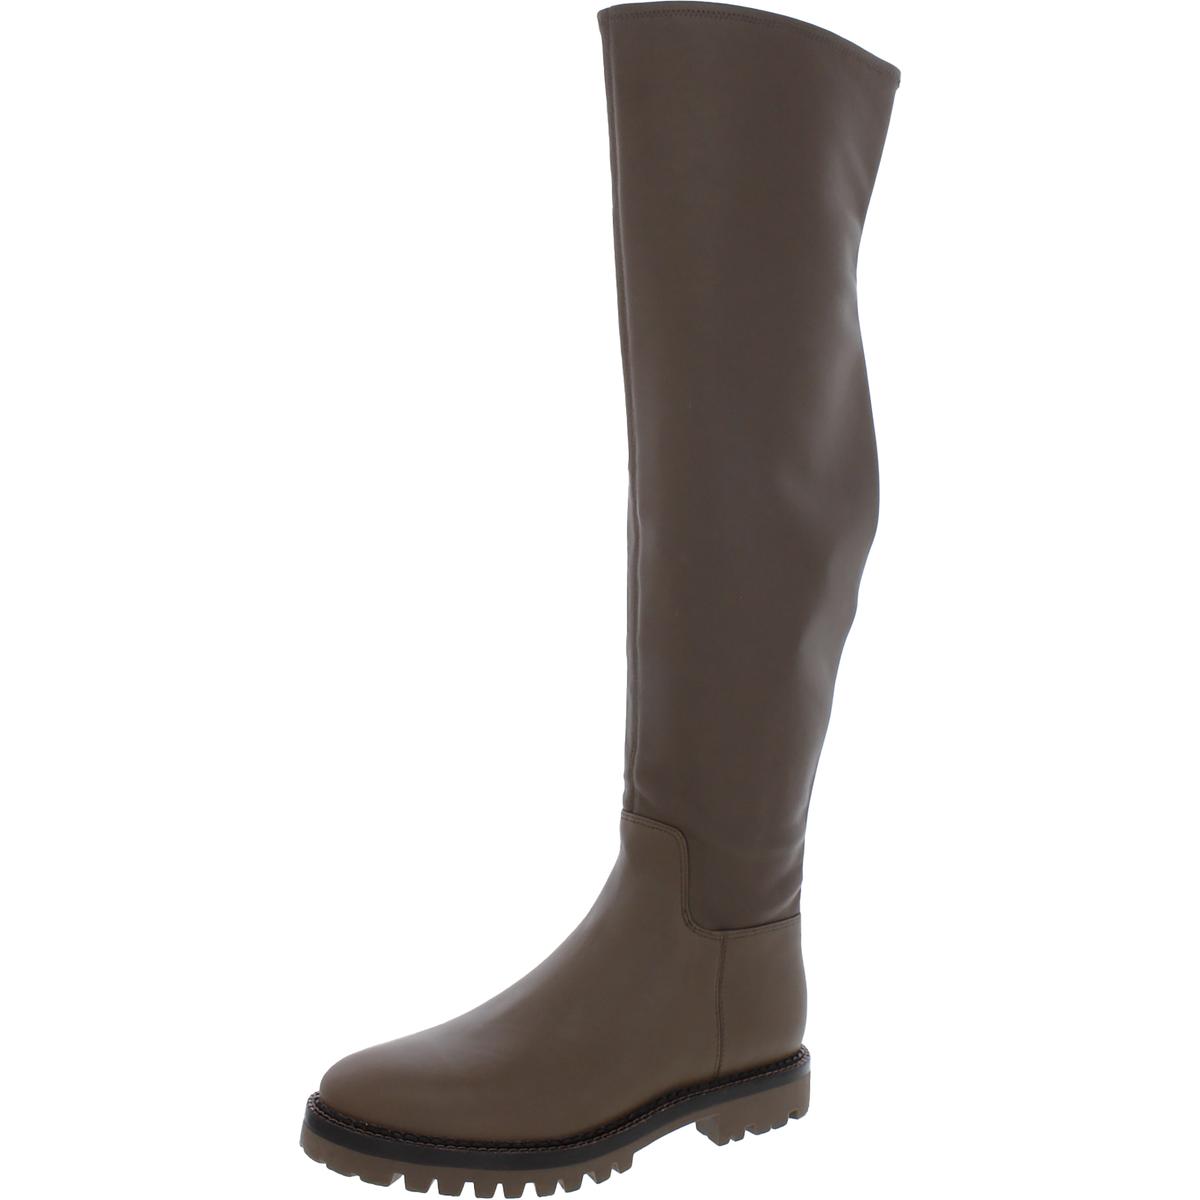 Vince Cabri Womens Leather Tall Over-The-Knee Boots